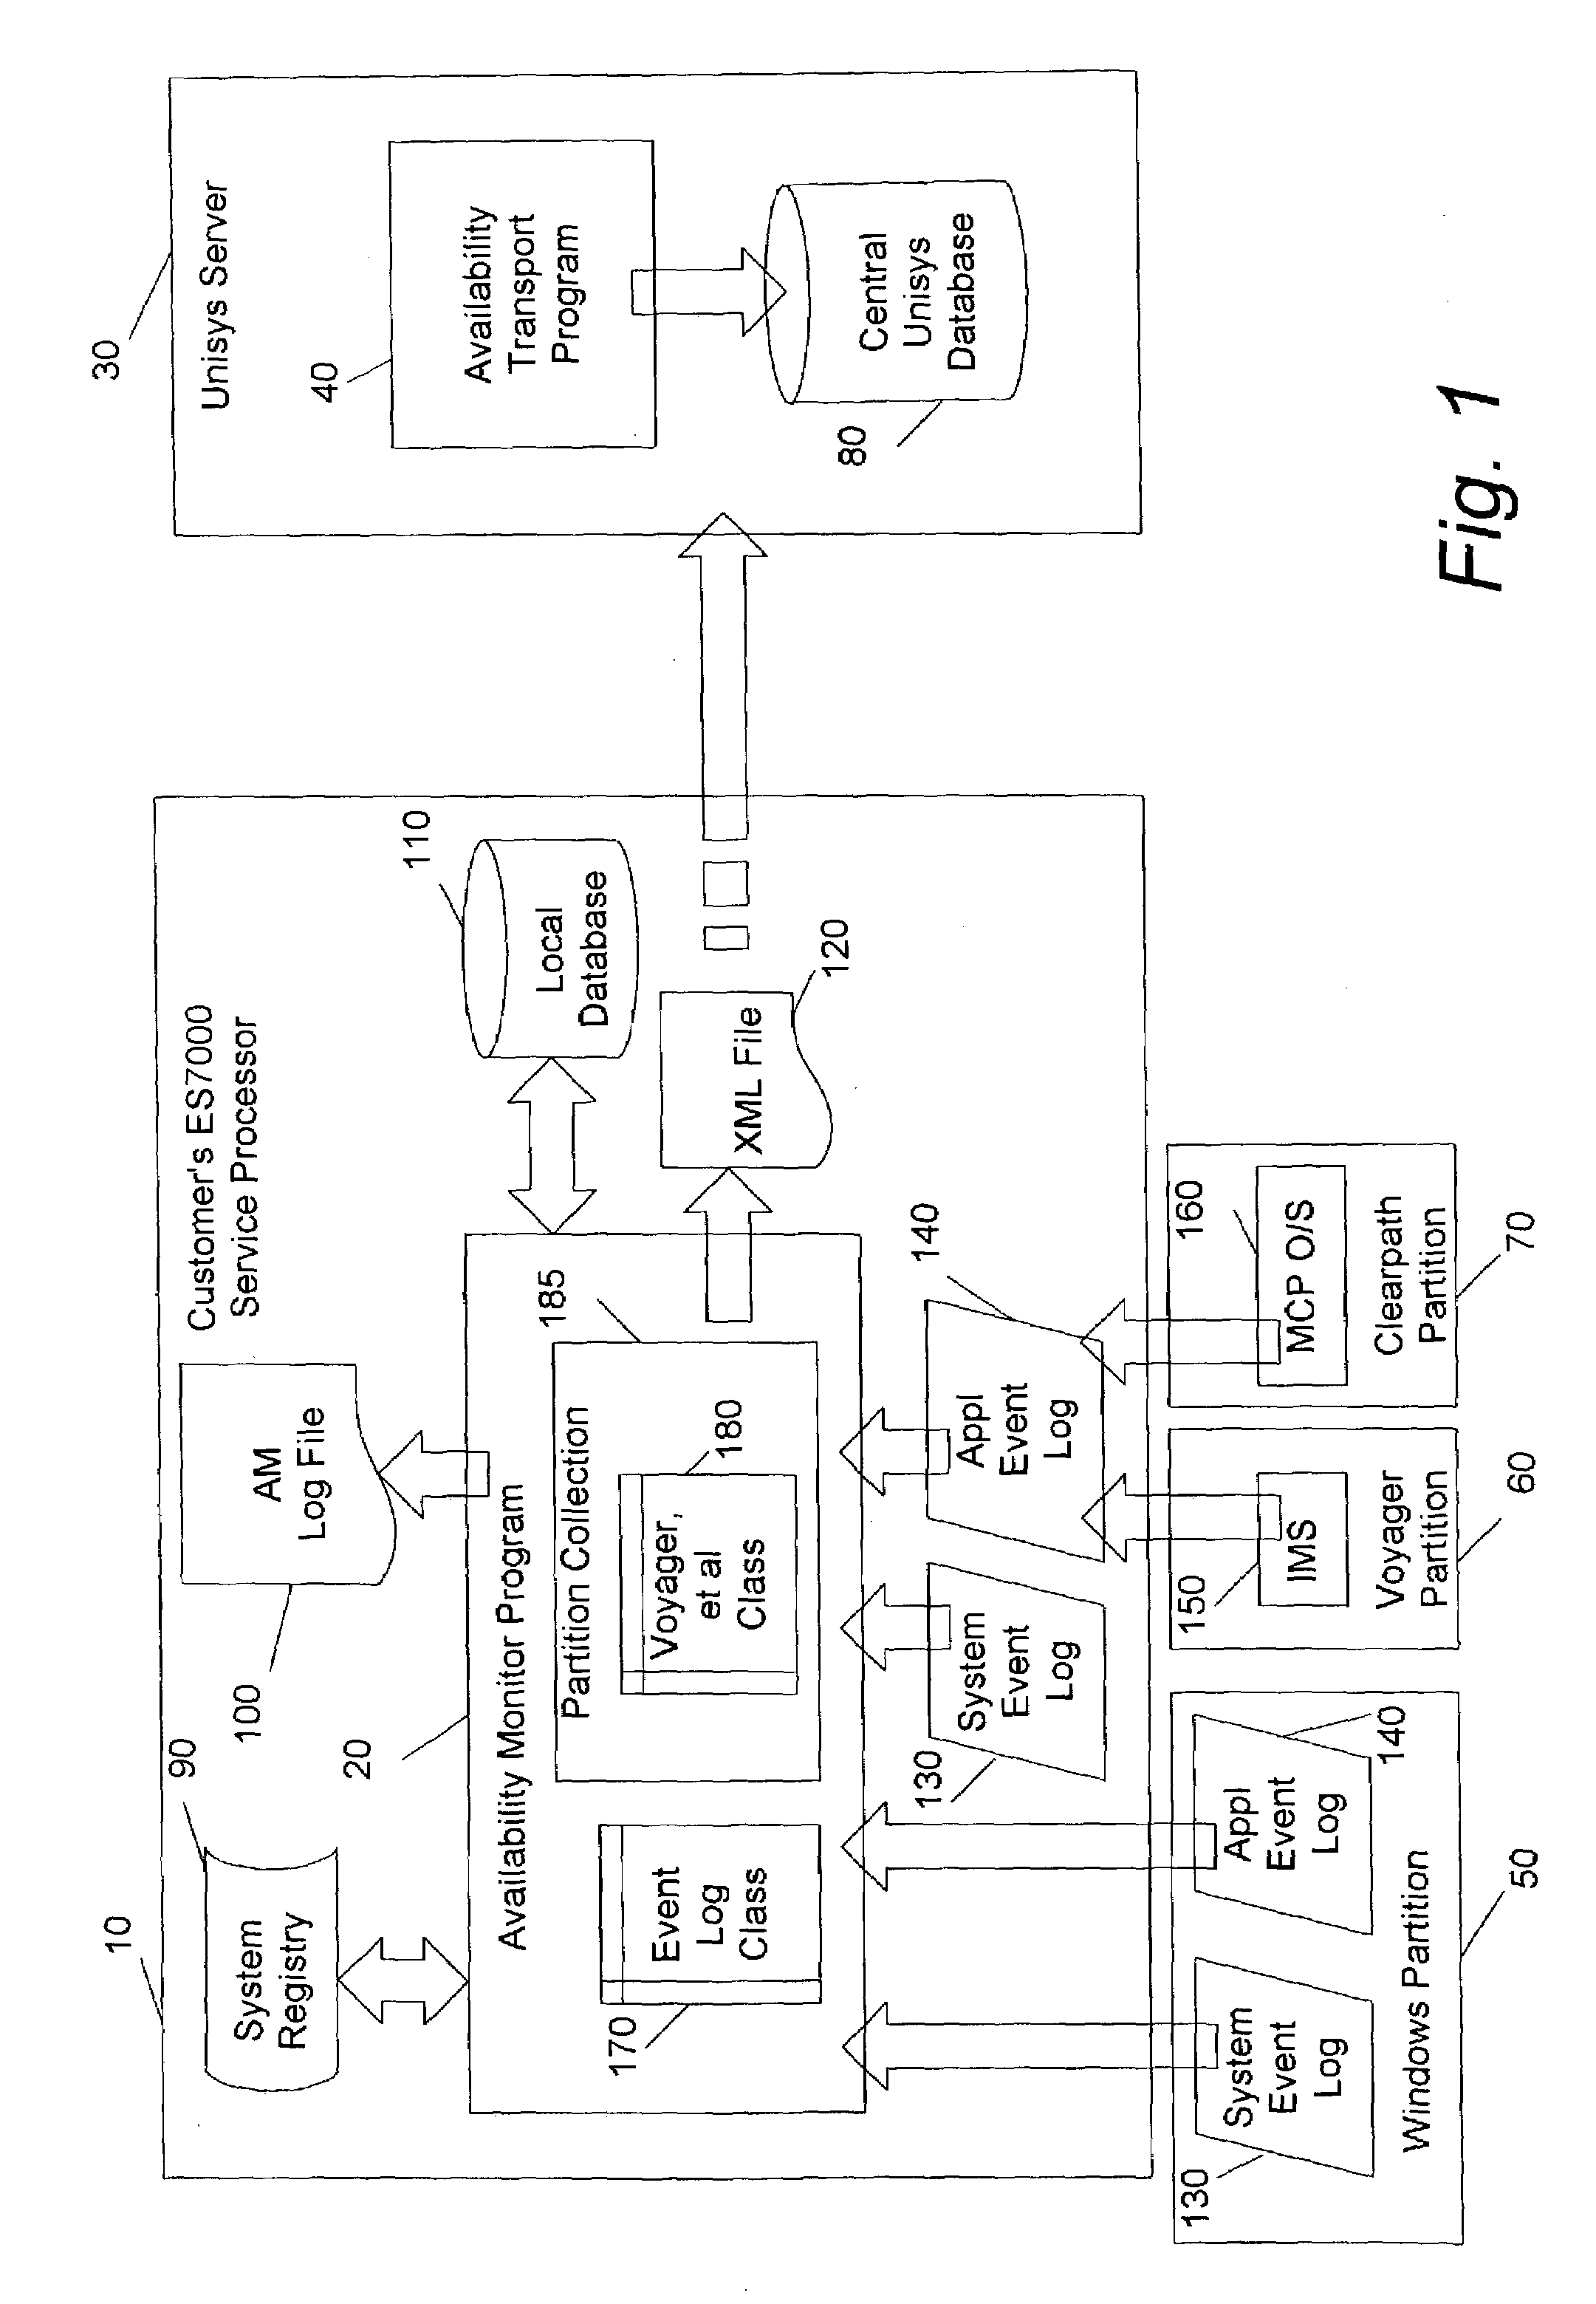 Method variation for collecting stability data from proprietary systems